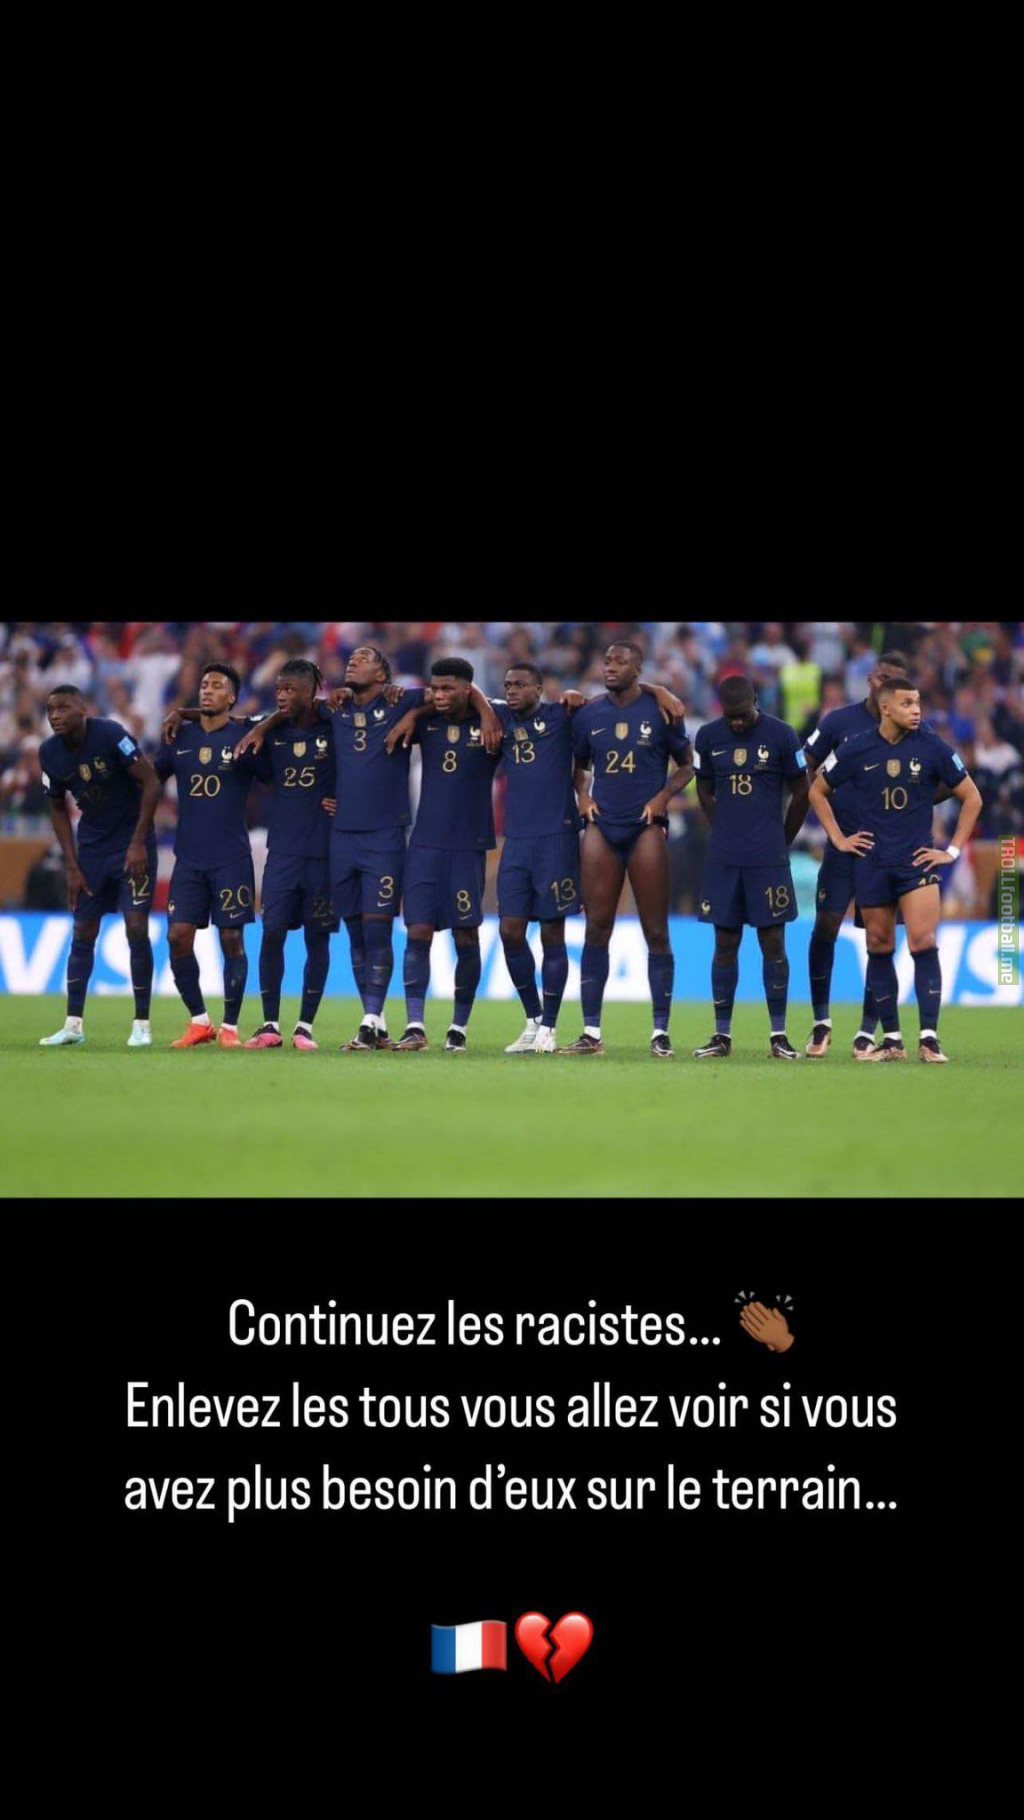 Bouna Sarr (former french now Senegalese right back) on Instagram: Keep going racists.. Remove them all - you'll see if you don't need them anymore on the pitch